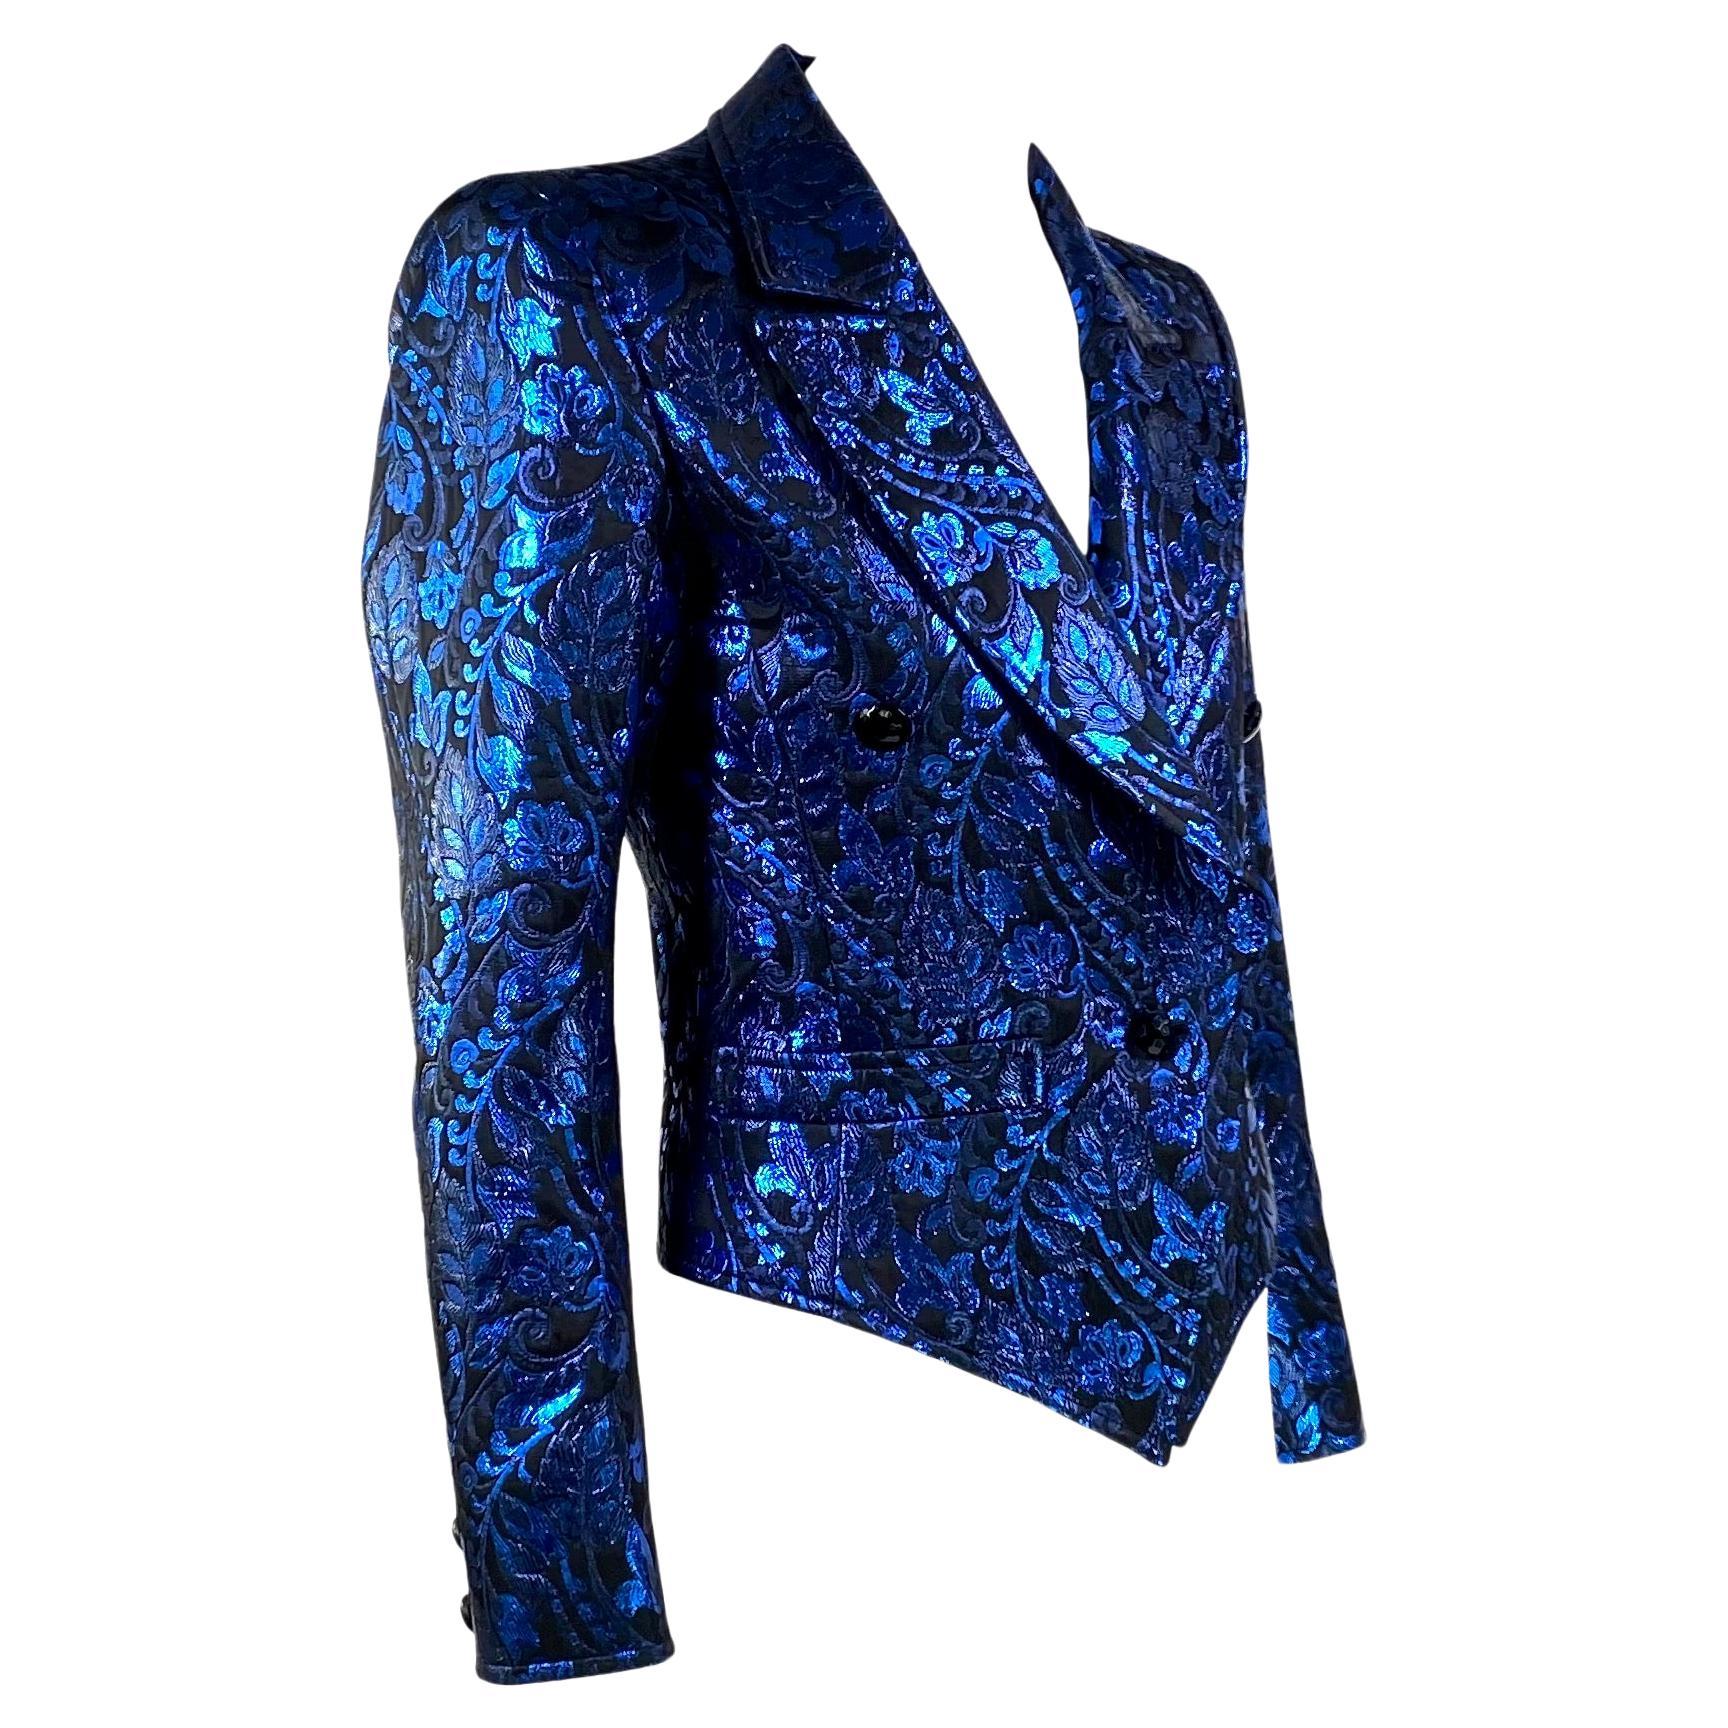 Presenting a stunning metallic blue lamé Saint Laurent Rive Gauche blazer, designed by Yves Saint Laurent. From the 1980s, this jacket features two front pockets, a large lapel, and a pseudo-double breasted jacket. This shimmery blazer is the